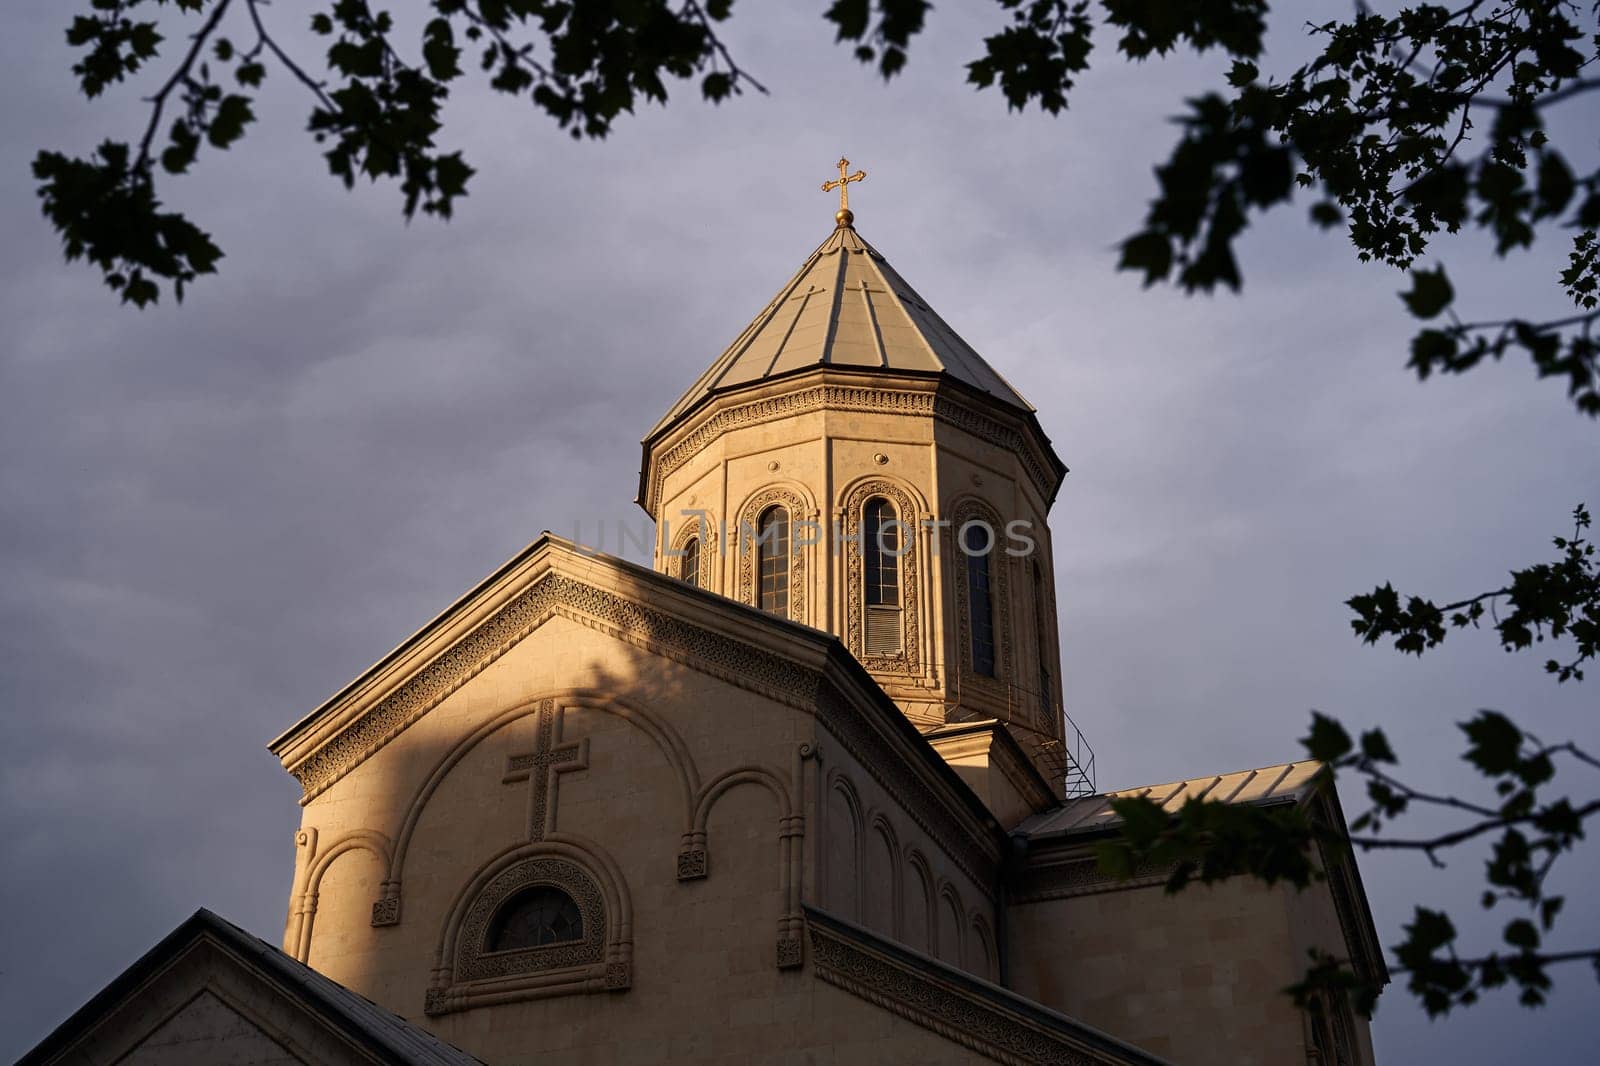 The Kashveti Church of St. George in central Tbilisi, located across from the Parliament building on Rustaveli Avenue.